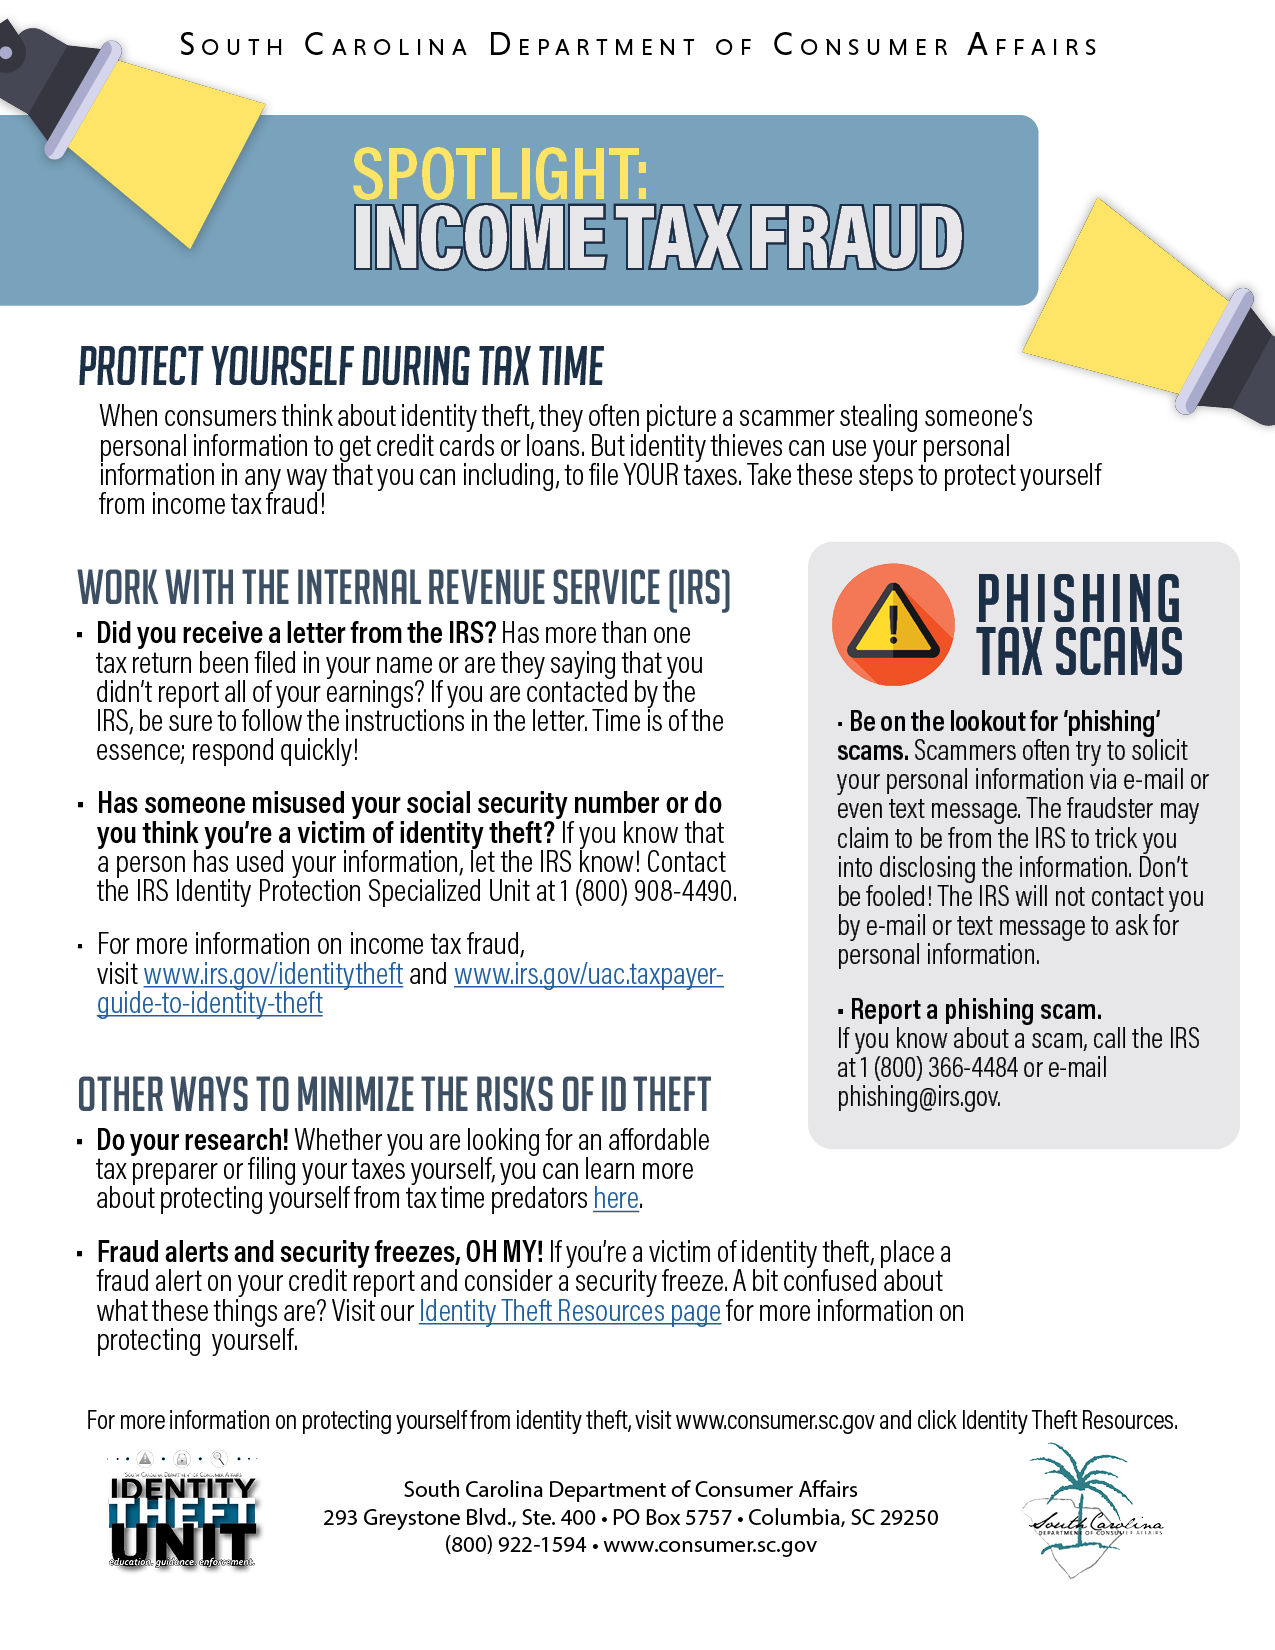 Tips on how to avoid income tax fraud.